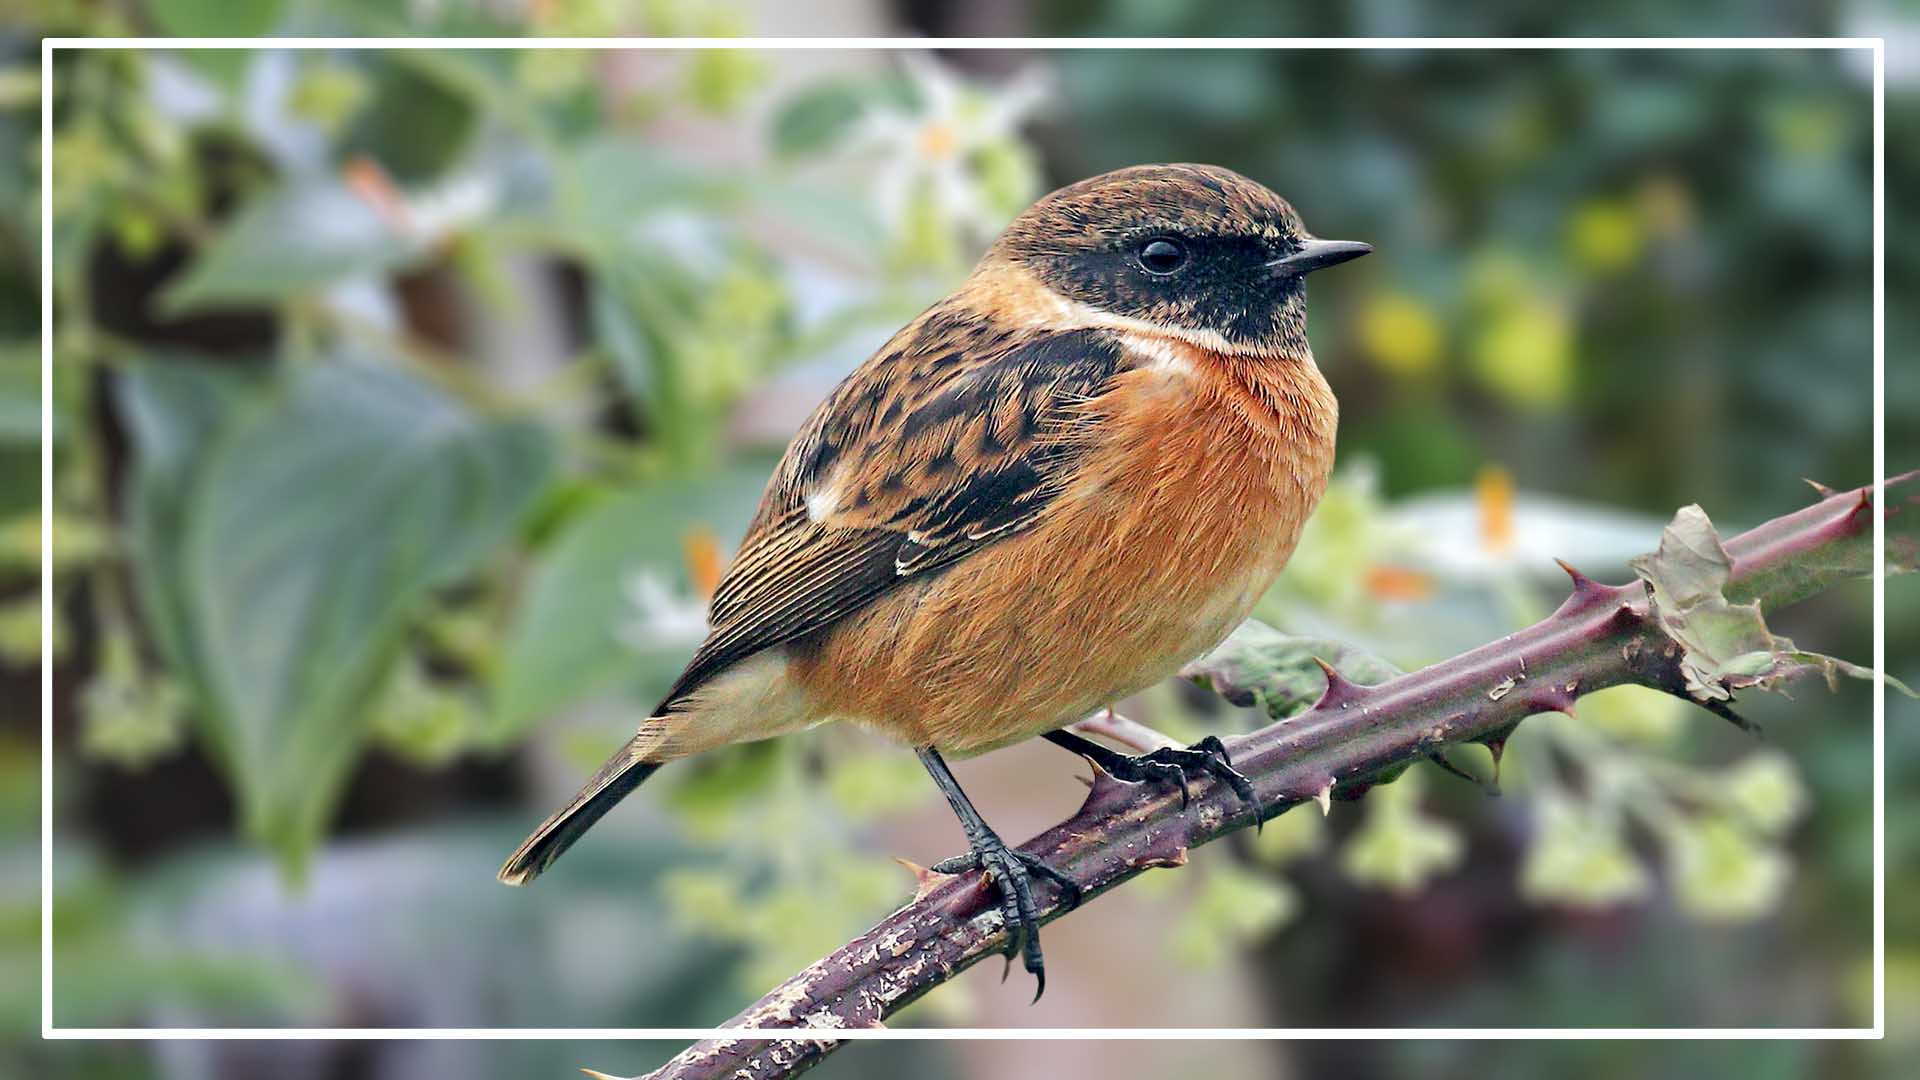 Stonechat is a Northern Cardinal